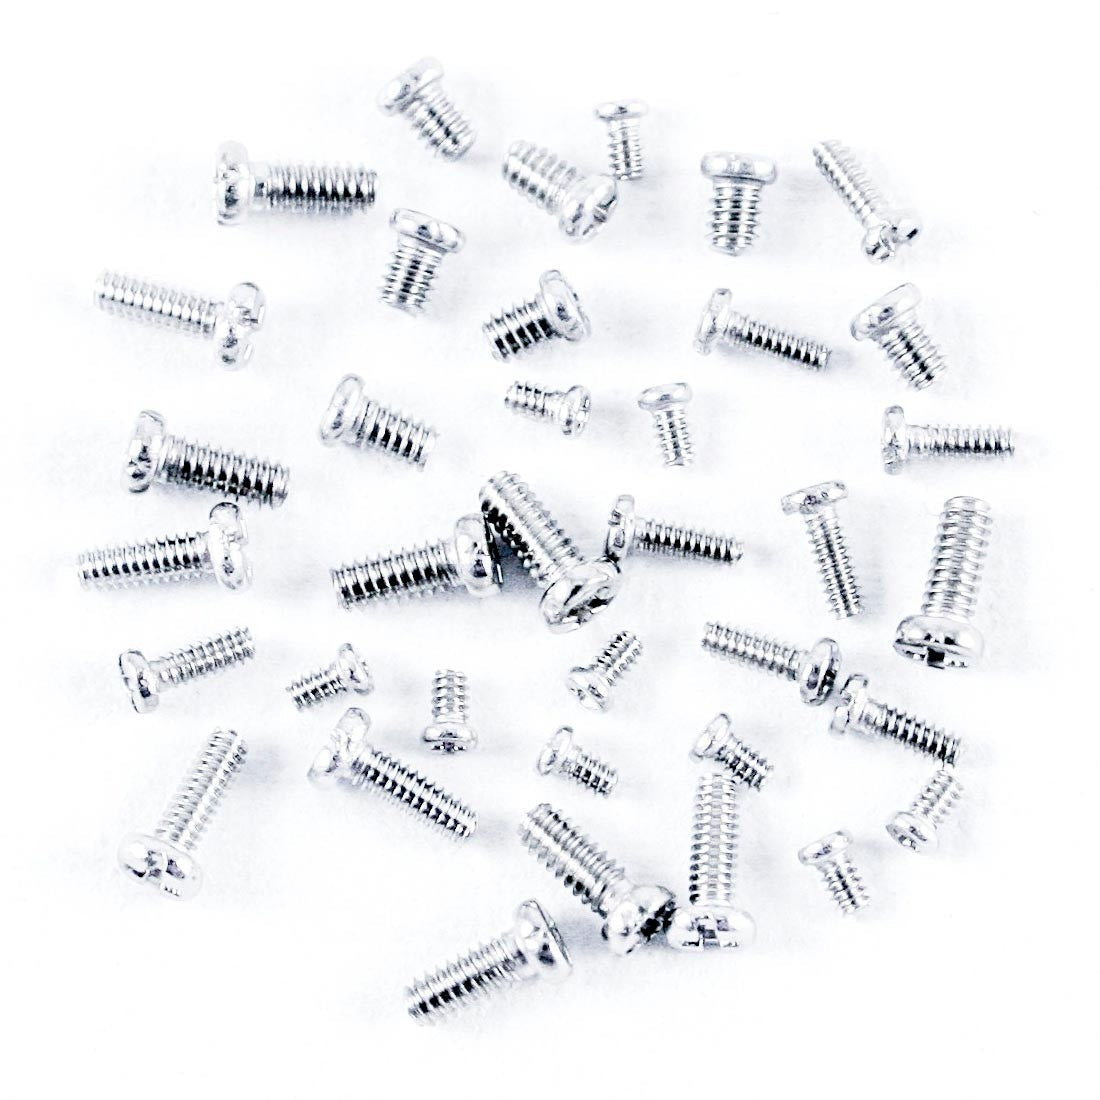 WS-170, Stainless Steel Phillips Head Case Back Screws Assortment